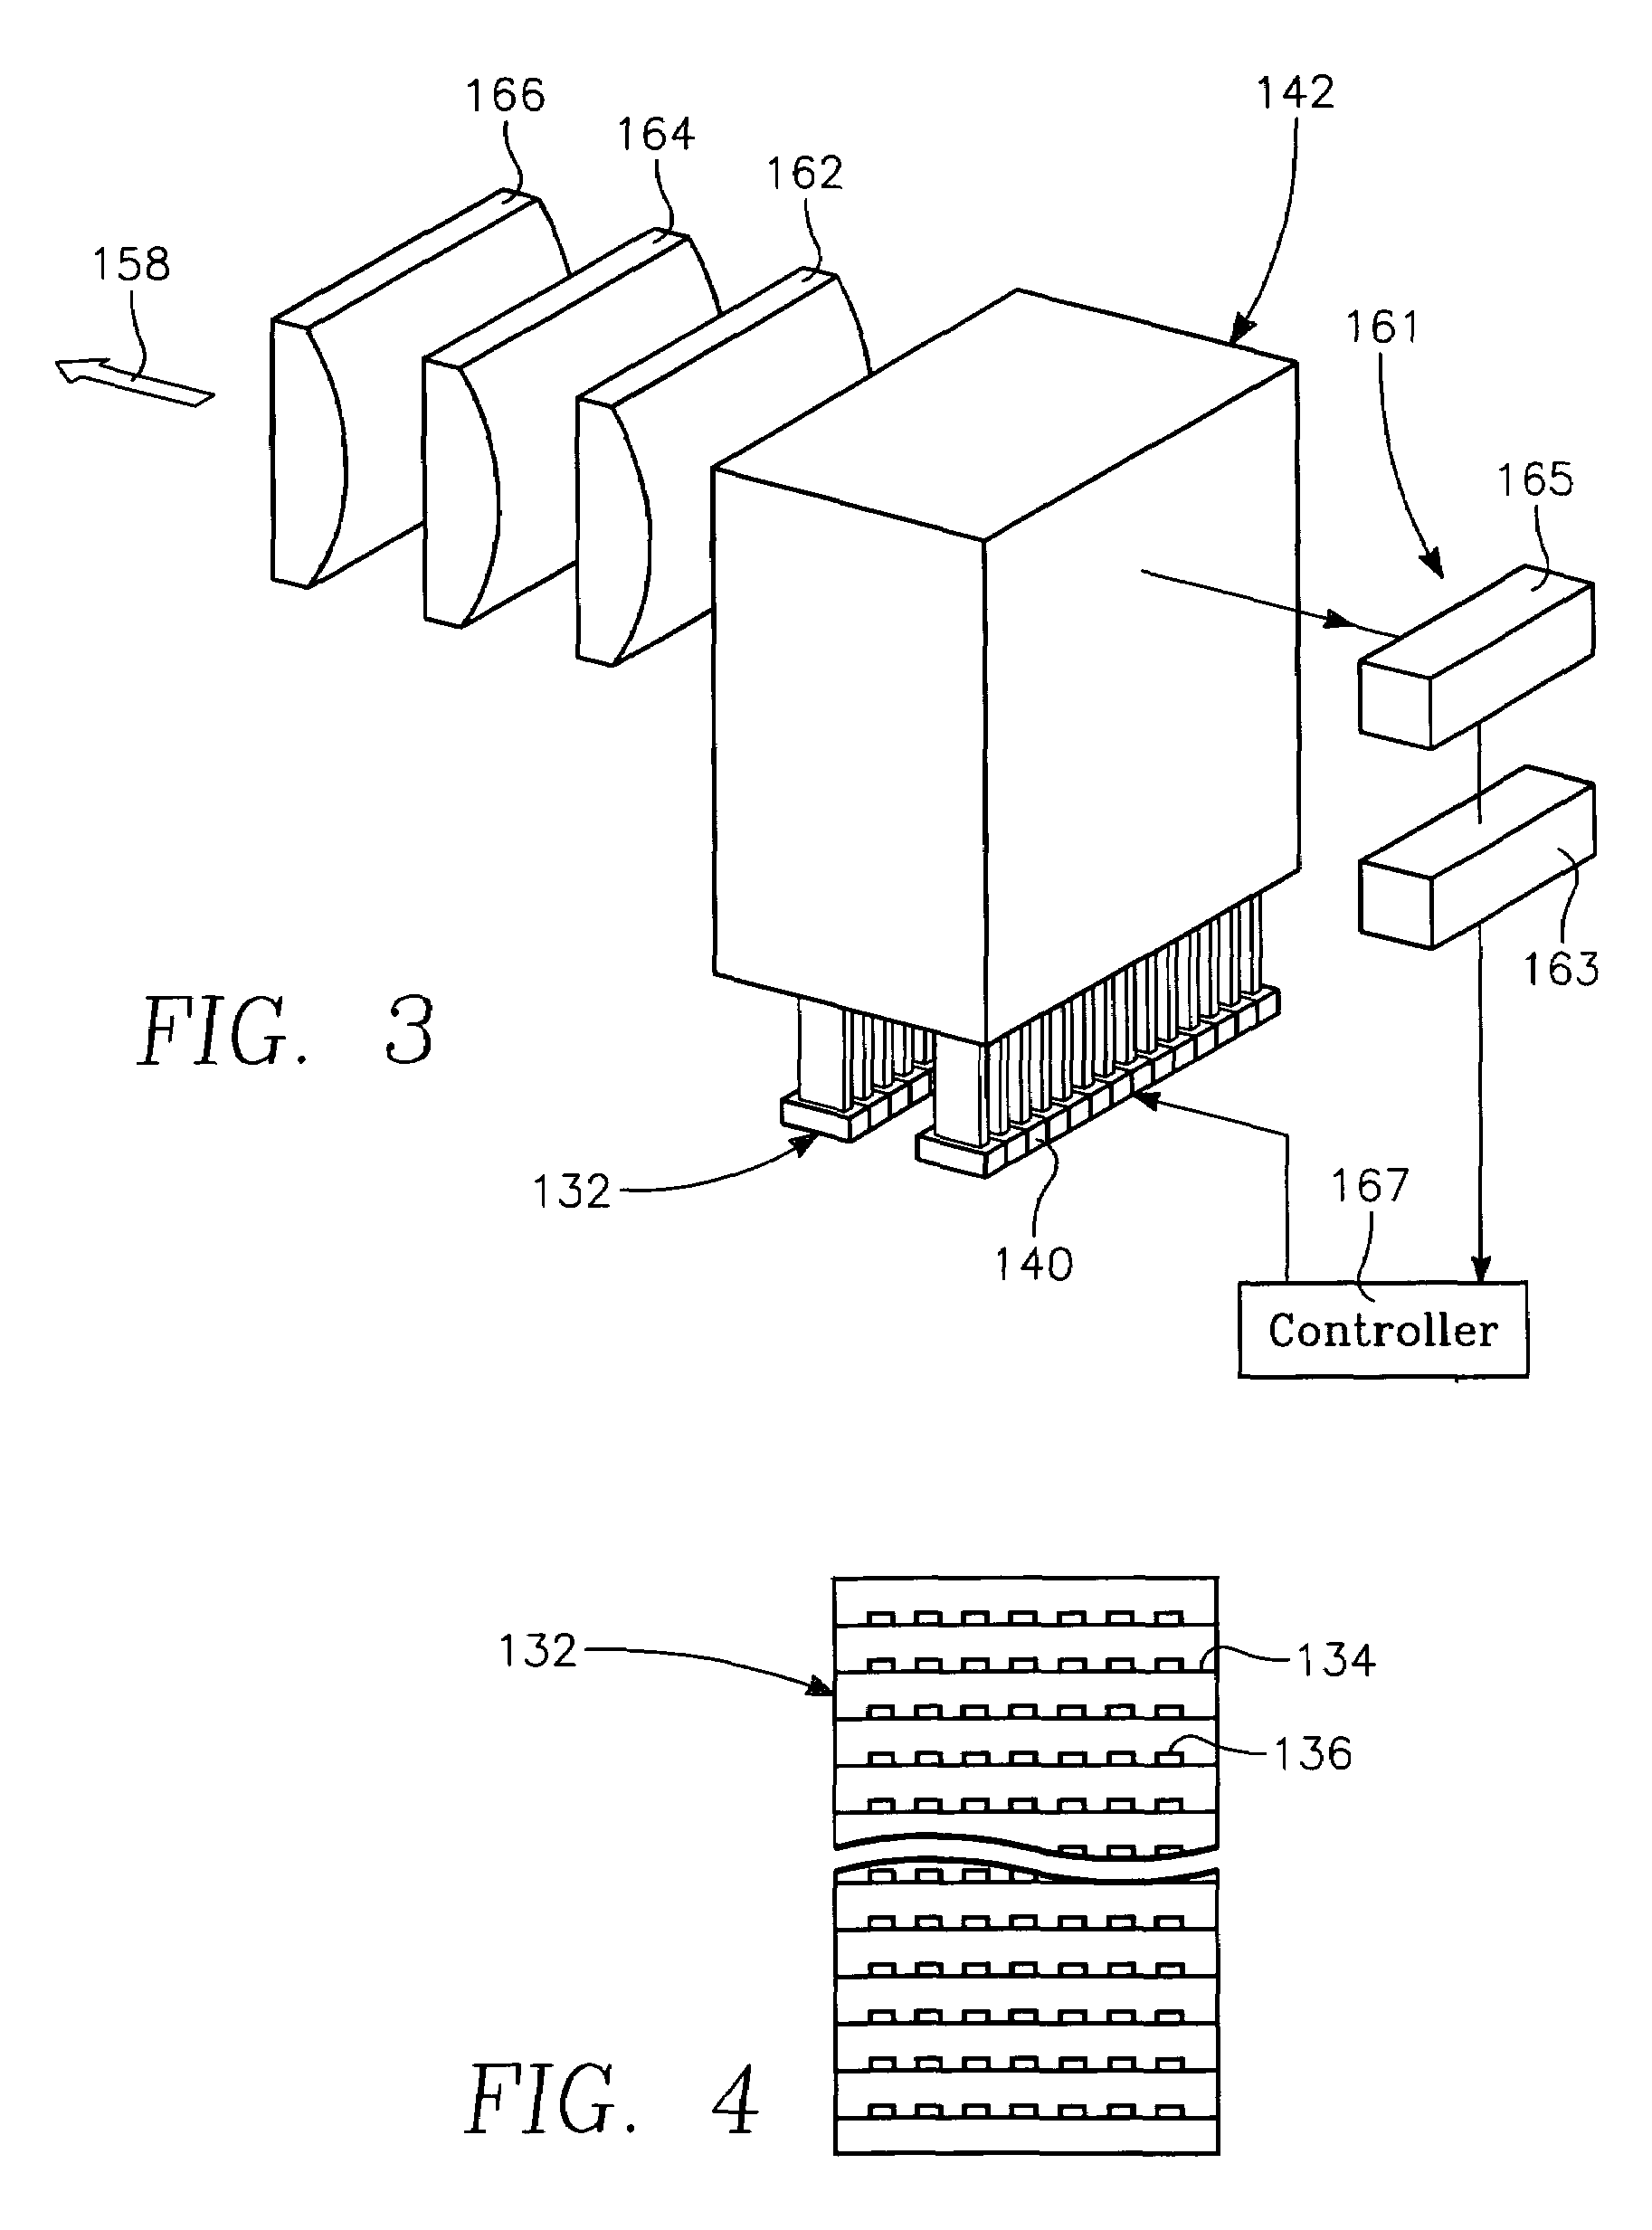 Semiconductor substrate process using an optically writable carbon-containing mask